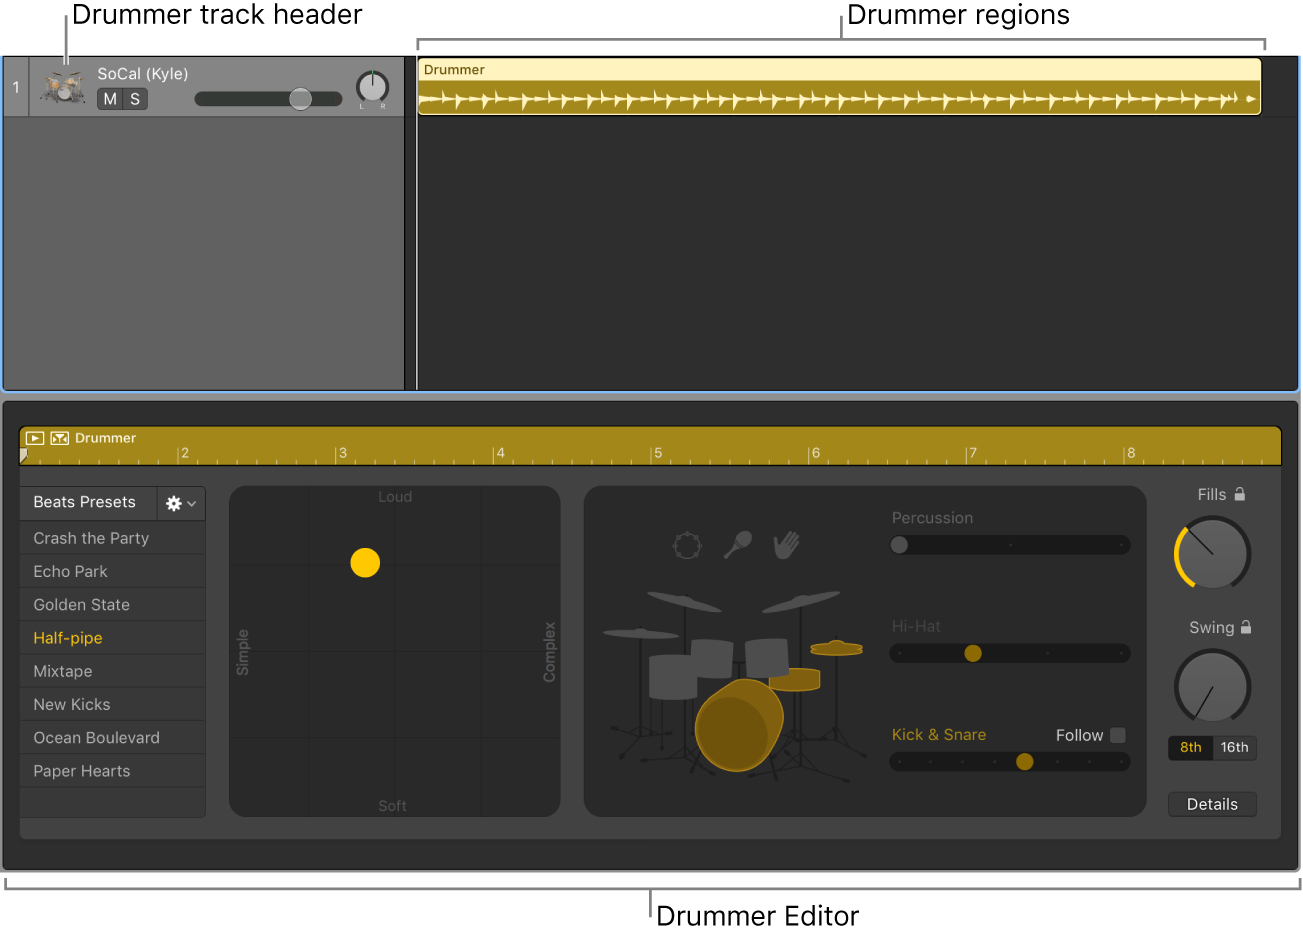 Figure. Shows a Drummer track containing Drummer regions, and the Drummer Editor.